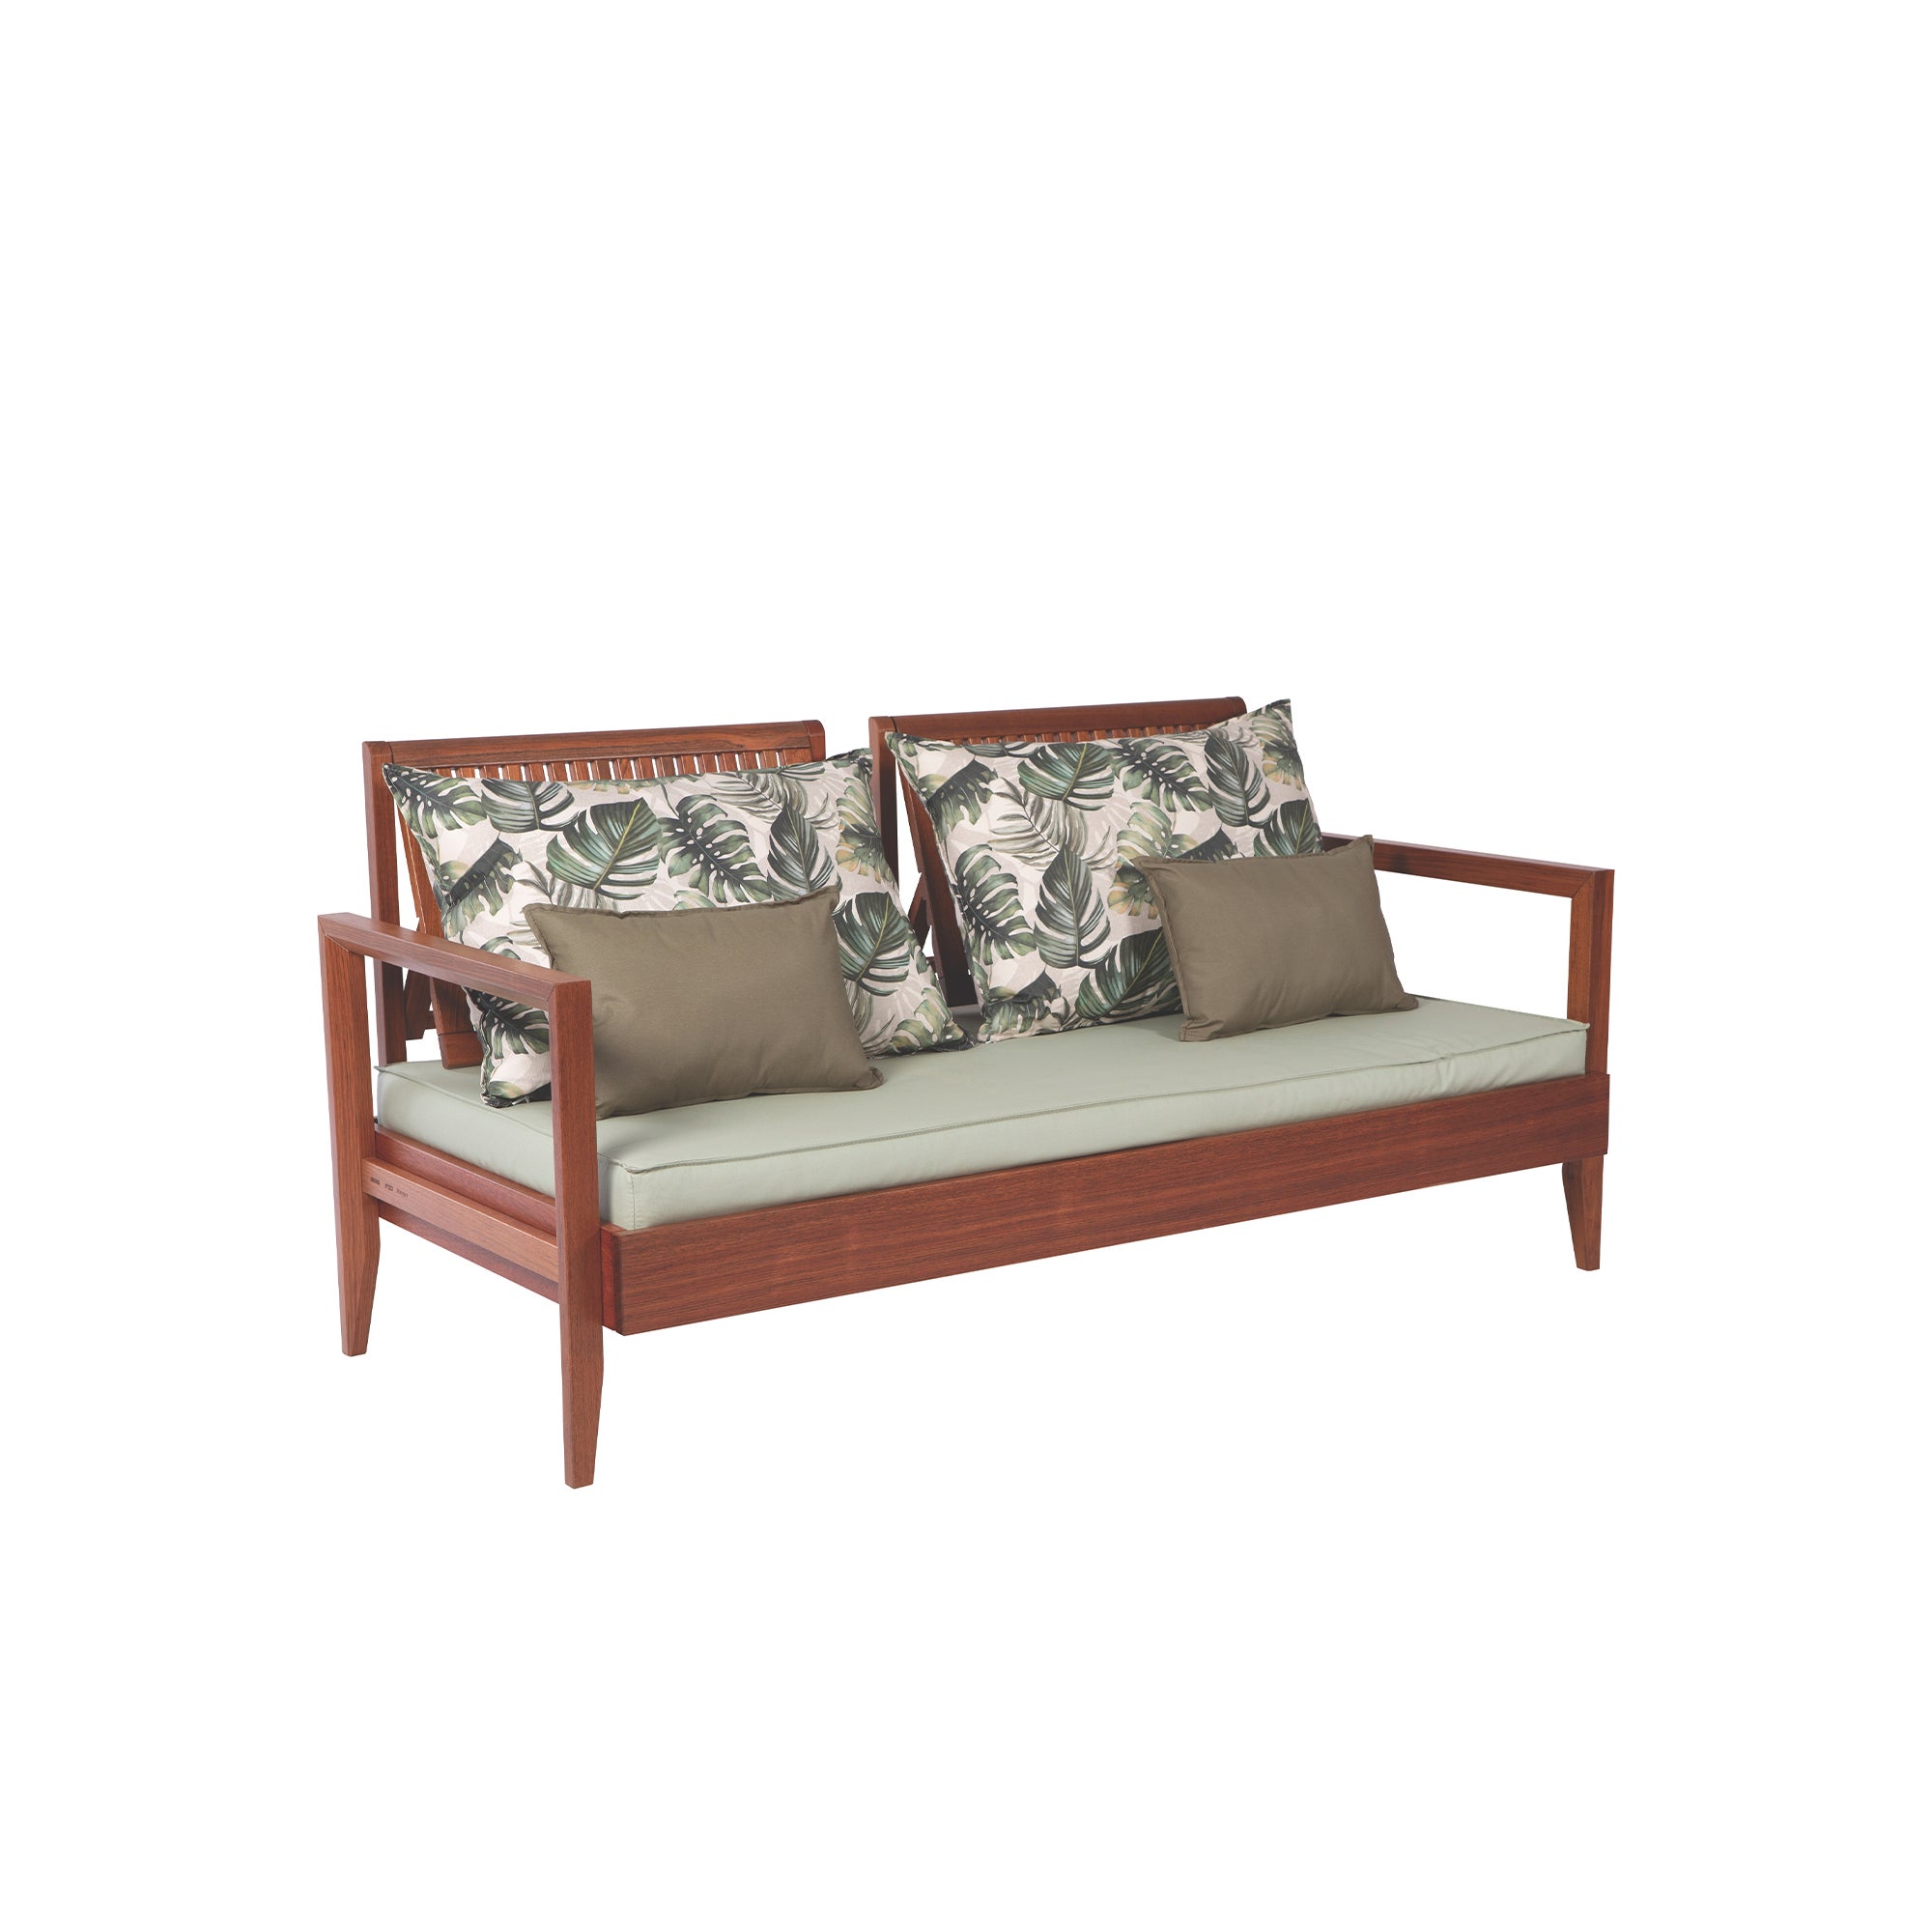 Tramontina Mood Wooden 2 Seater Lounge Sofa Cream Olive Green